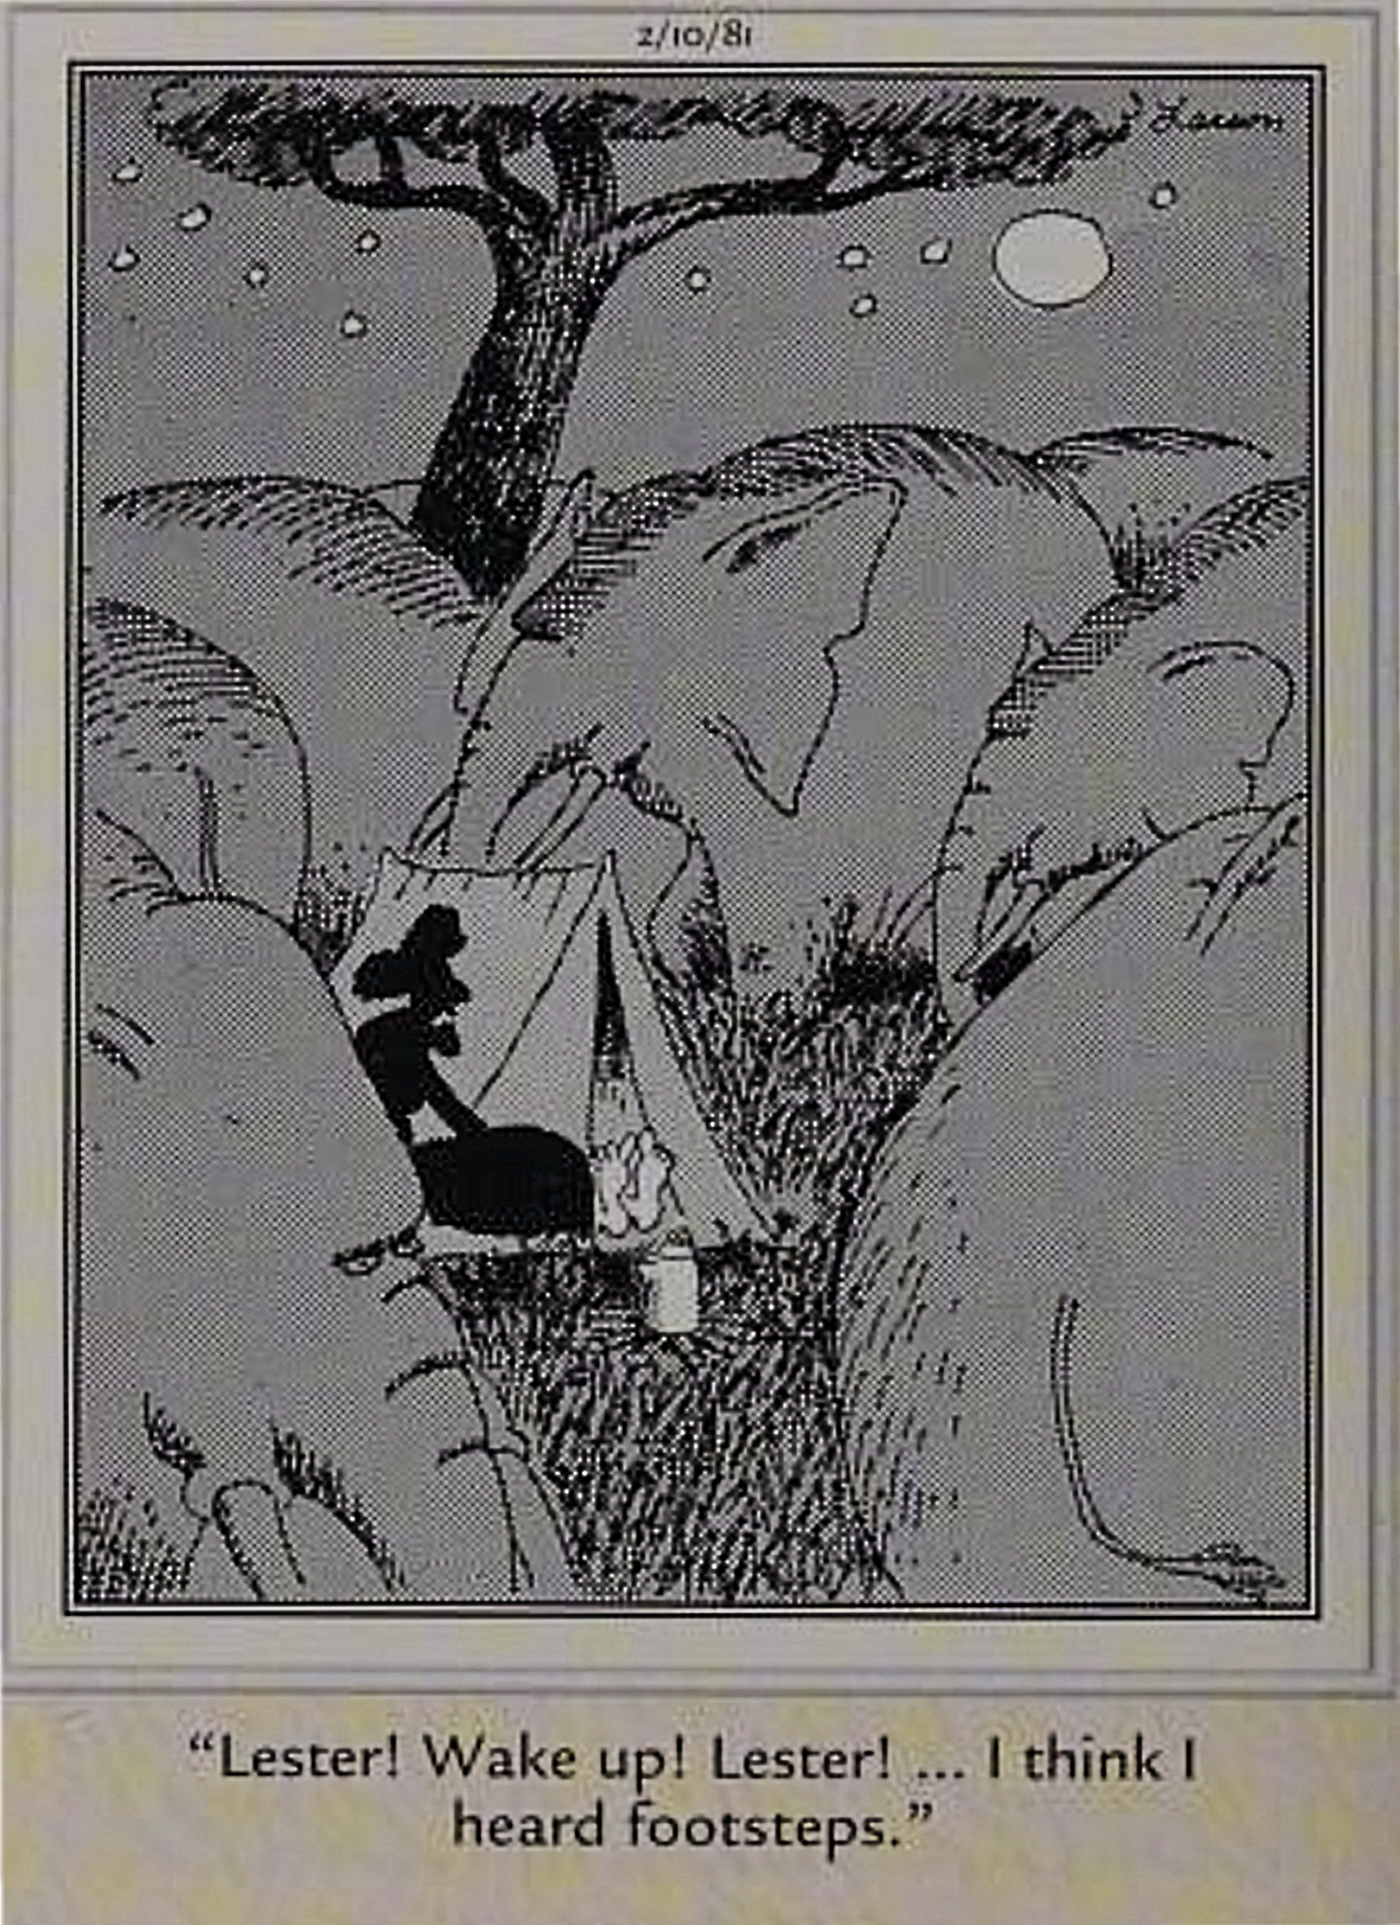 Far Side, elephants surround a tent at night